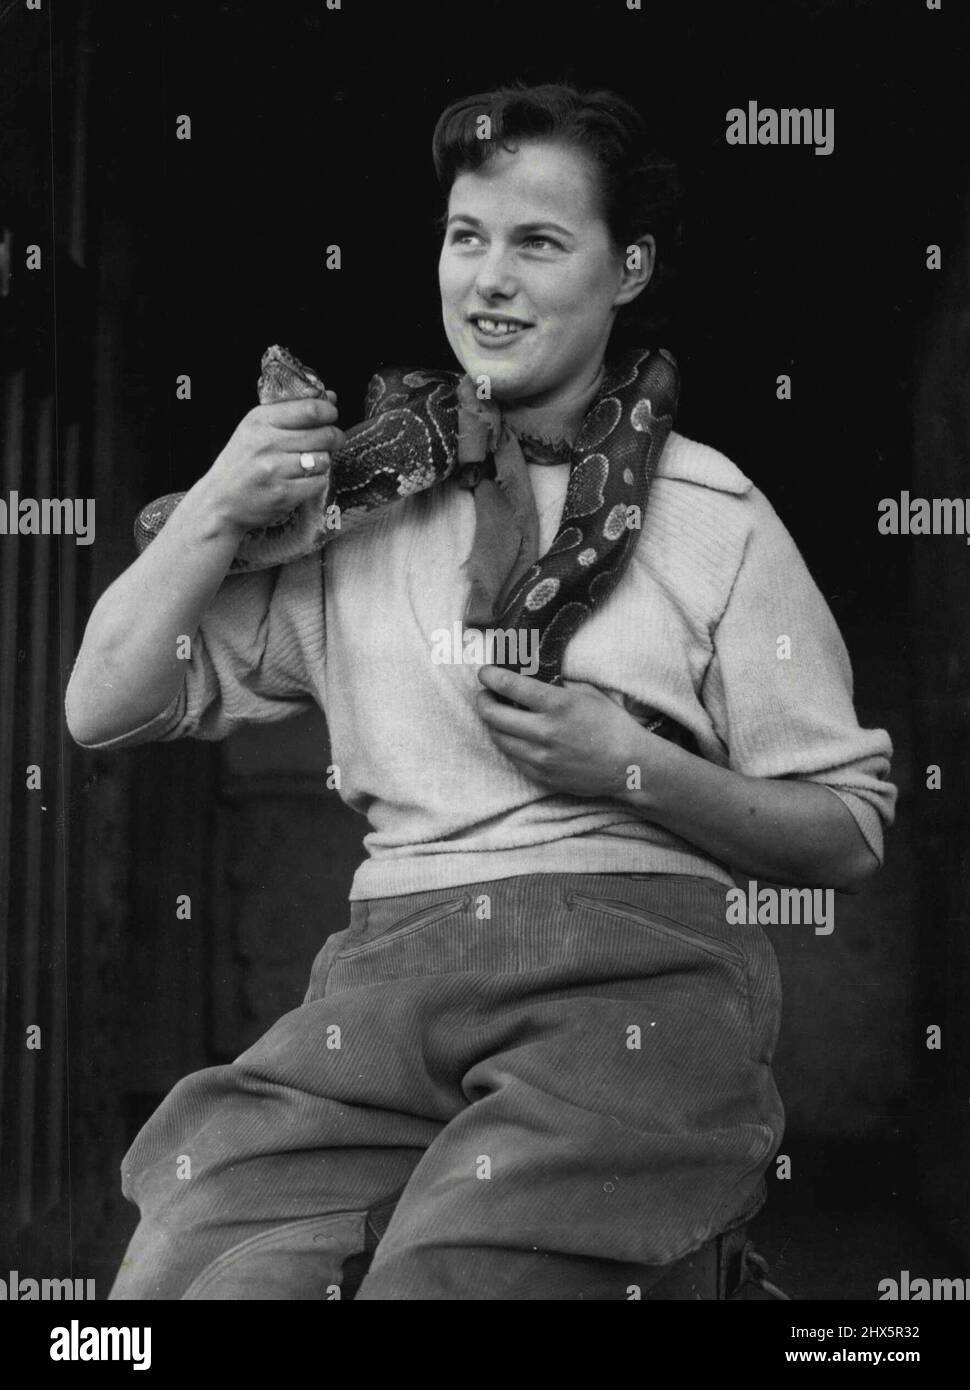 Has A Grip On Her Job -- Far cry from taking dictation to handling snakes, but former shorthand typist Gilliam Ashby competently undertakes a job that would make many girls shudder. Here she shows the correct way to hold a python at the Chester Zoo, where she is one of the three attractive girl keepers. Gillian, 22, joined the zoo a year ago. She is a native of Newcastle-under-Lyme, near take-on-Trent, Staffordshire. Far Cry from taking dictation is former shorthand typist Gillian Ashby's newest occupation. October 28, 1954. (Photo by Reuterphoto). Stock Photo